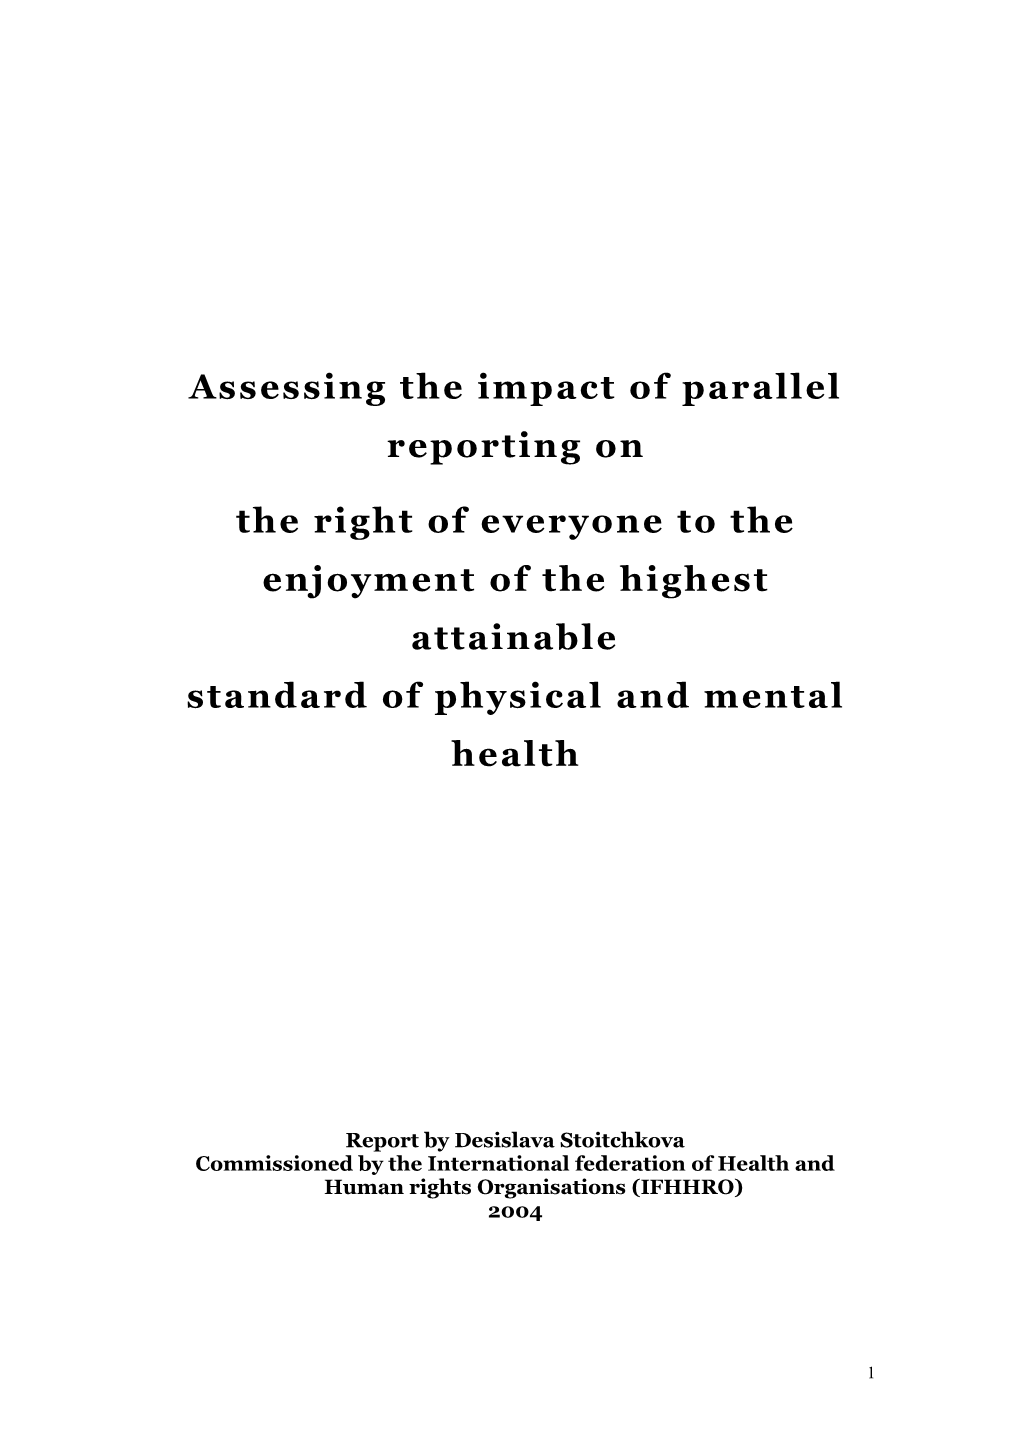 Assessing the Impact of Parallel Reporting On